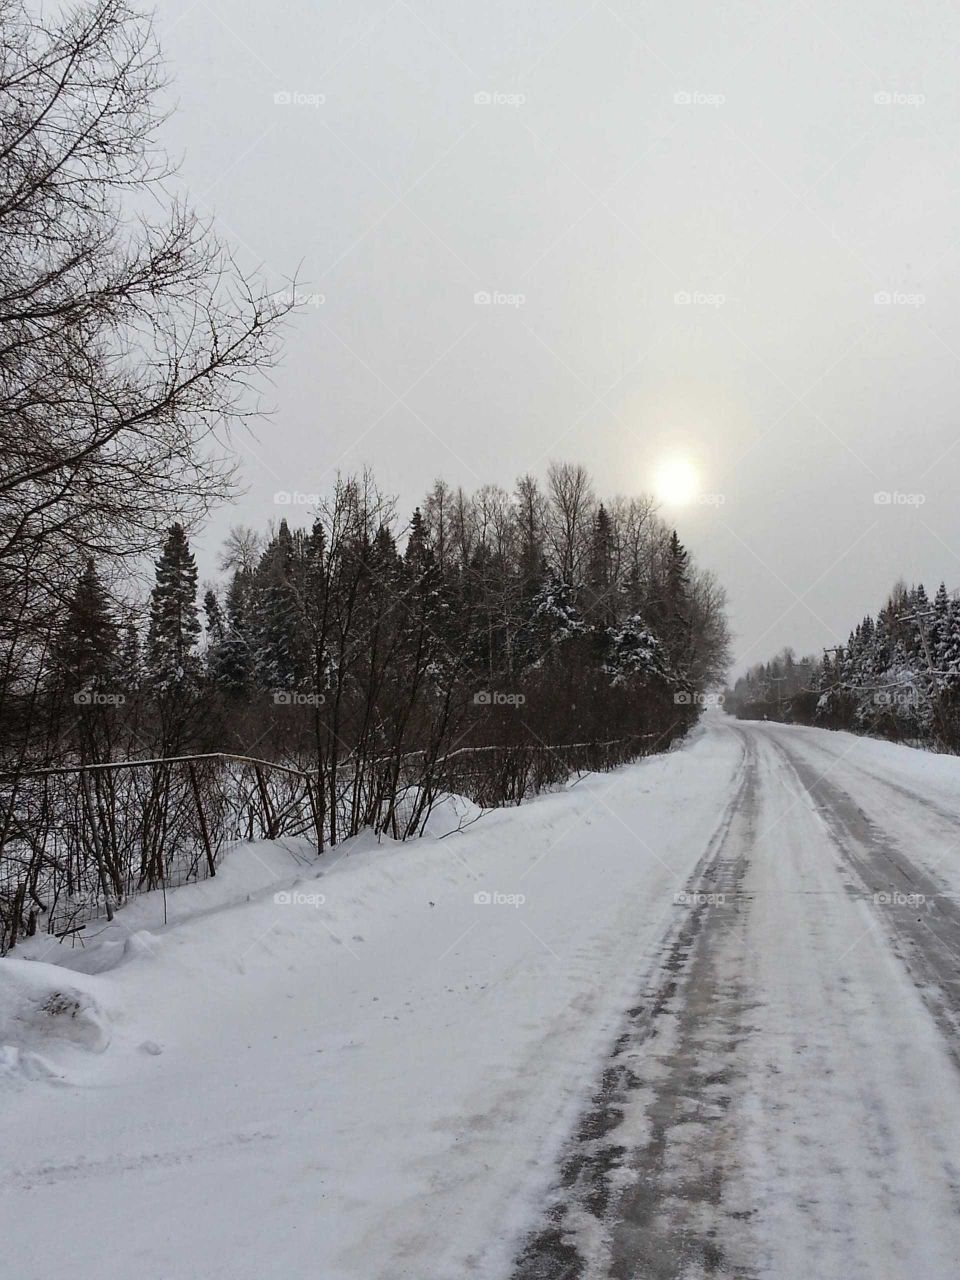 A winter scene in the country; a snowy road , trees and the sun